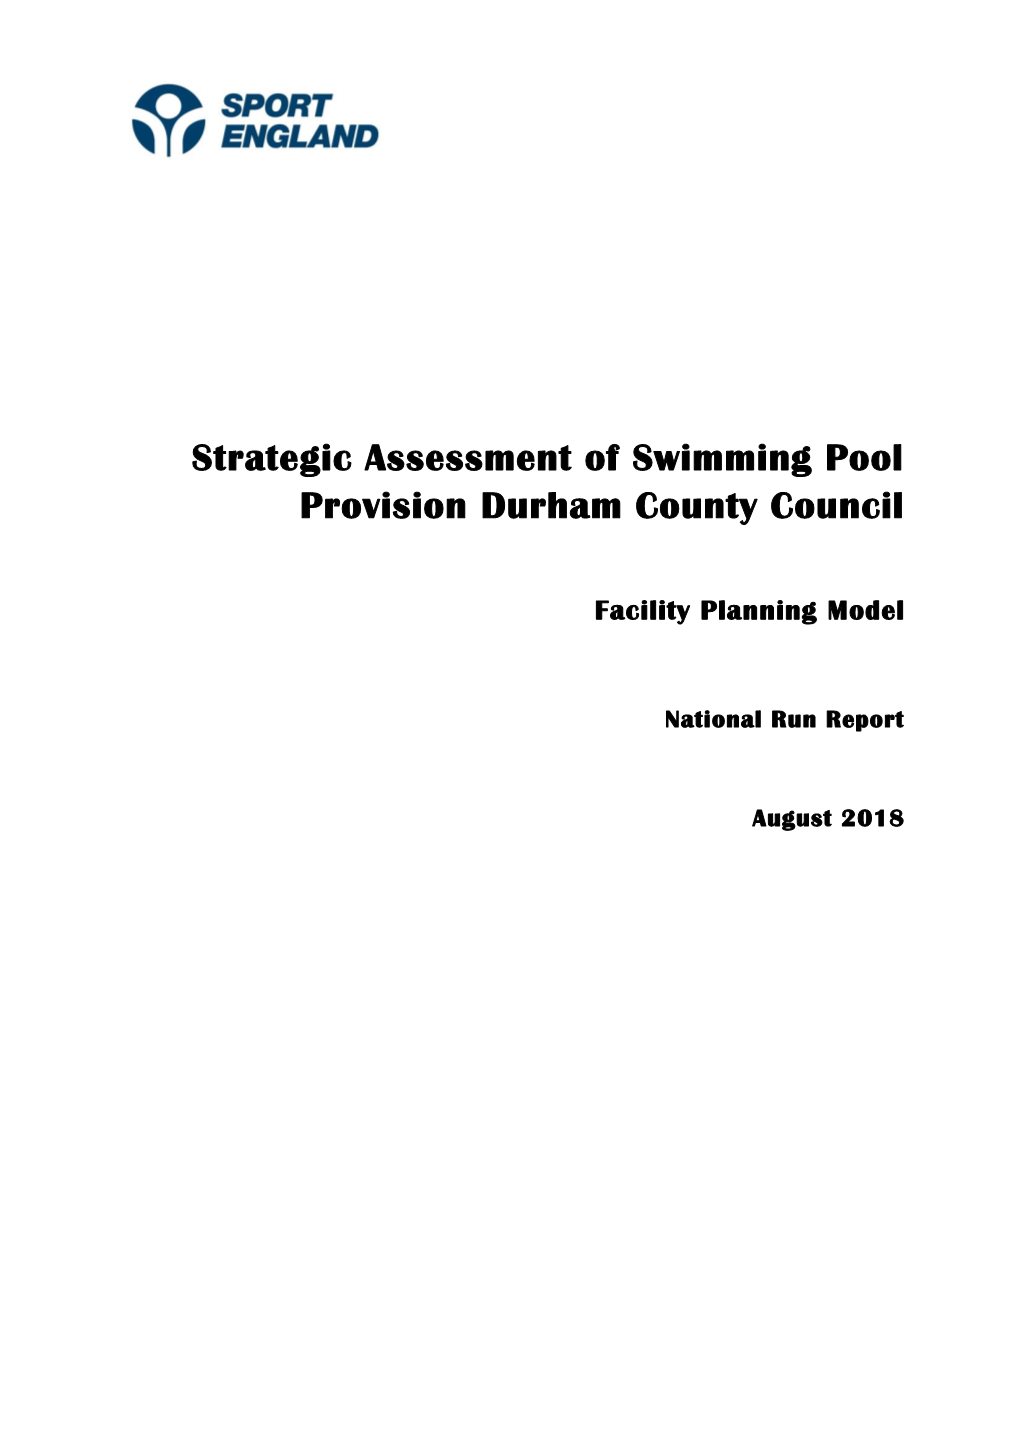 Strategic Assessment of Swimming Pool Provision Durham County Council